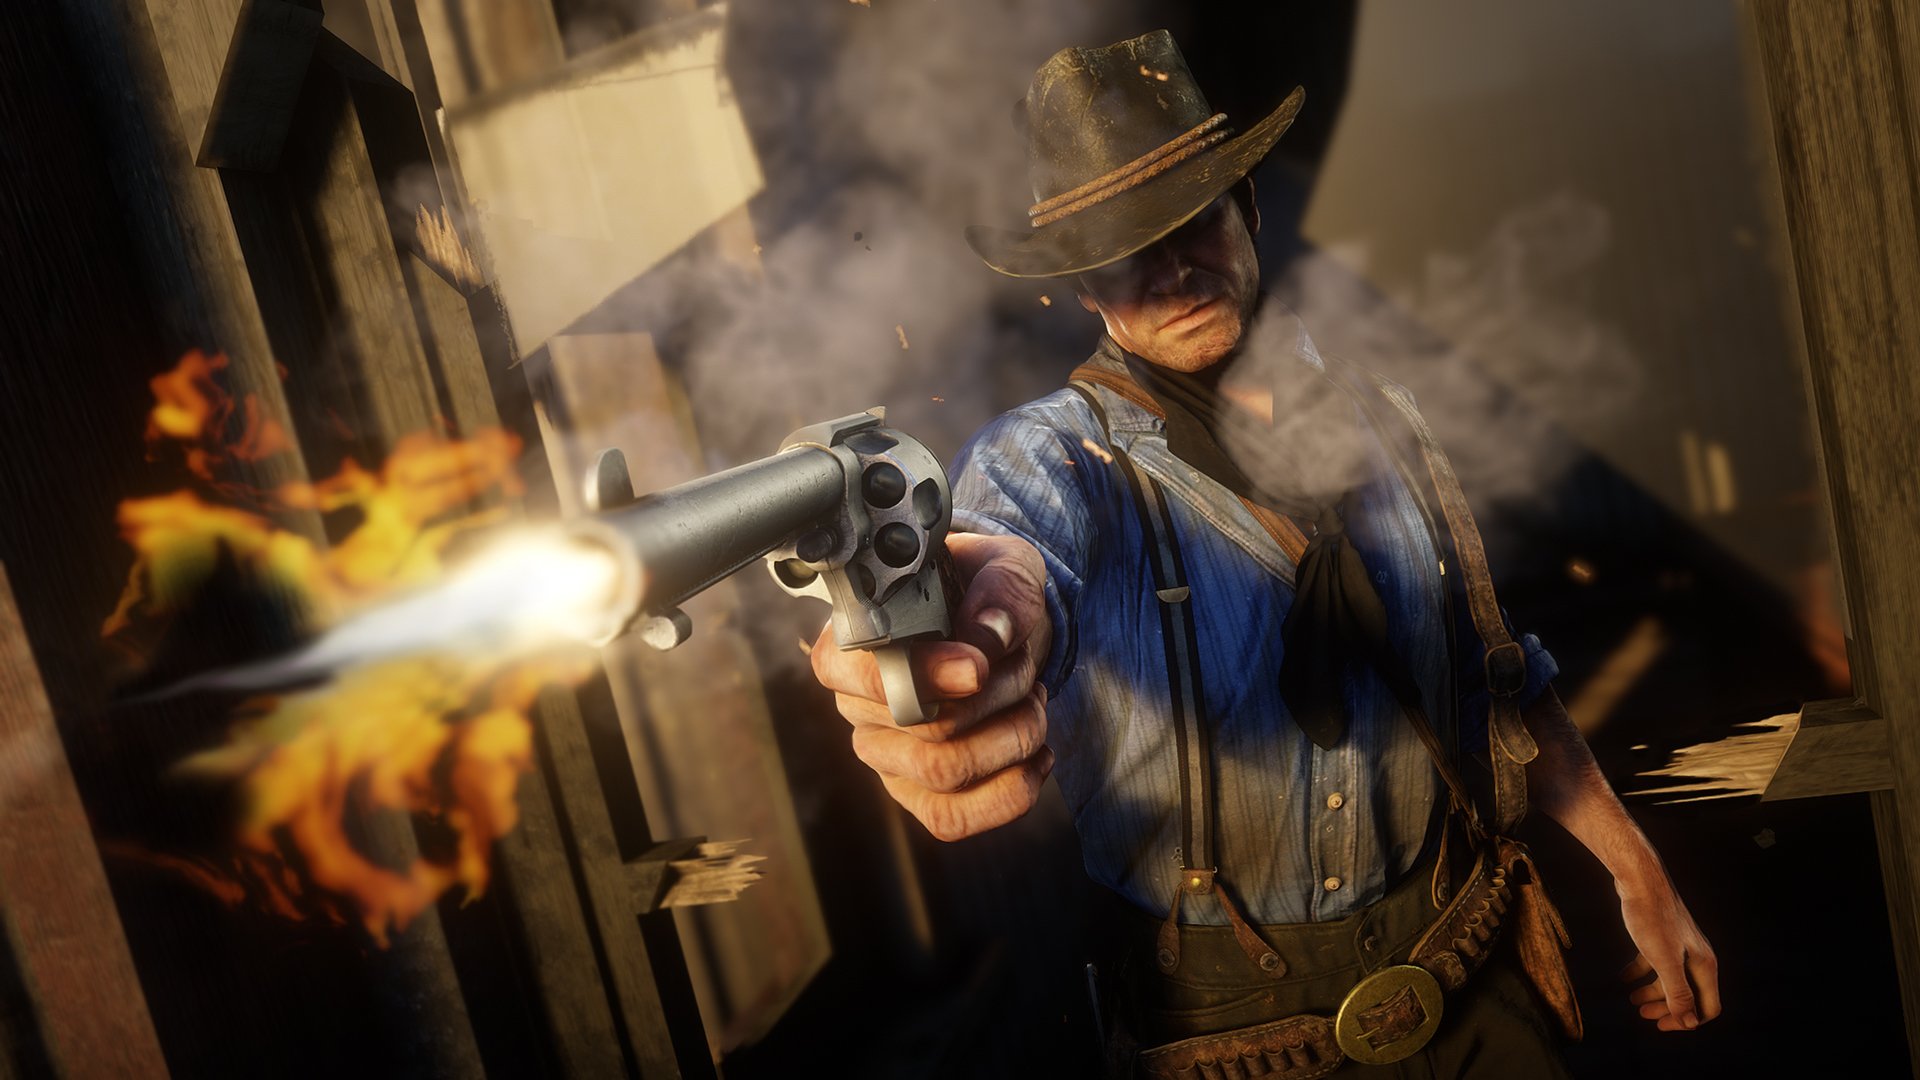 Red Dead Redemption 2 Leak Confirms Previous PS5 and Xbox Series X Port